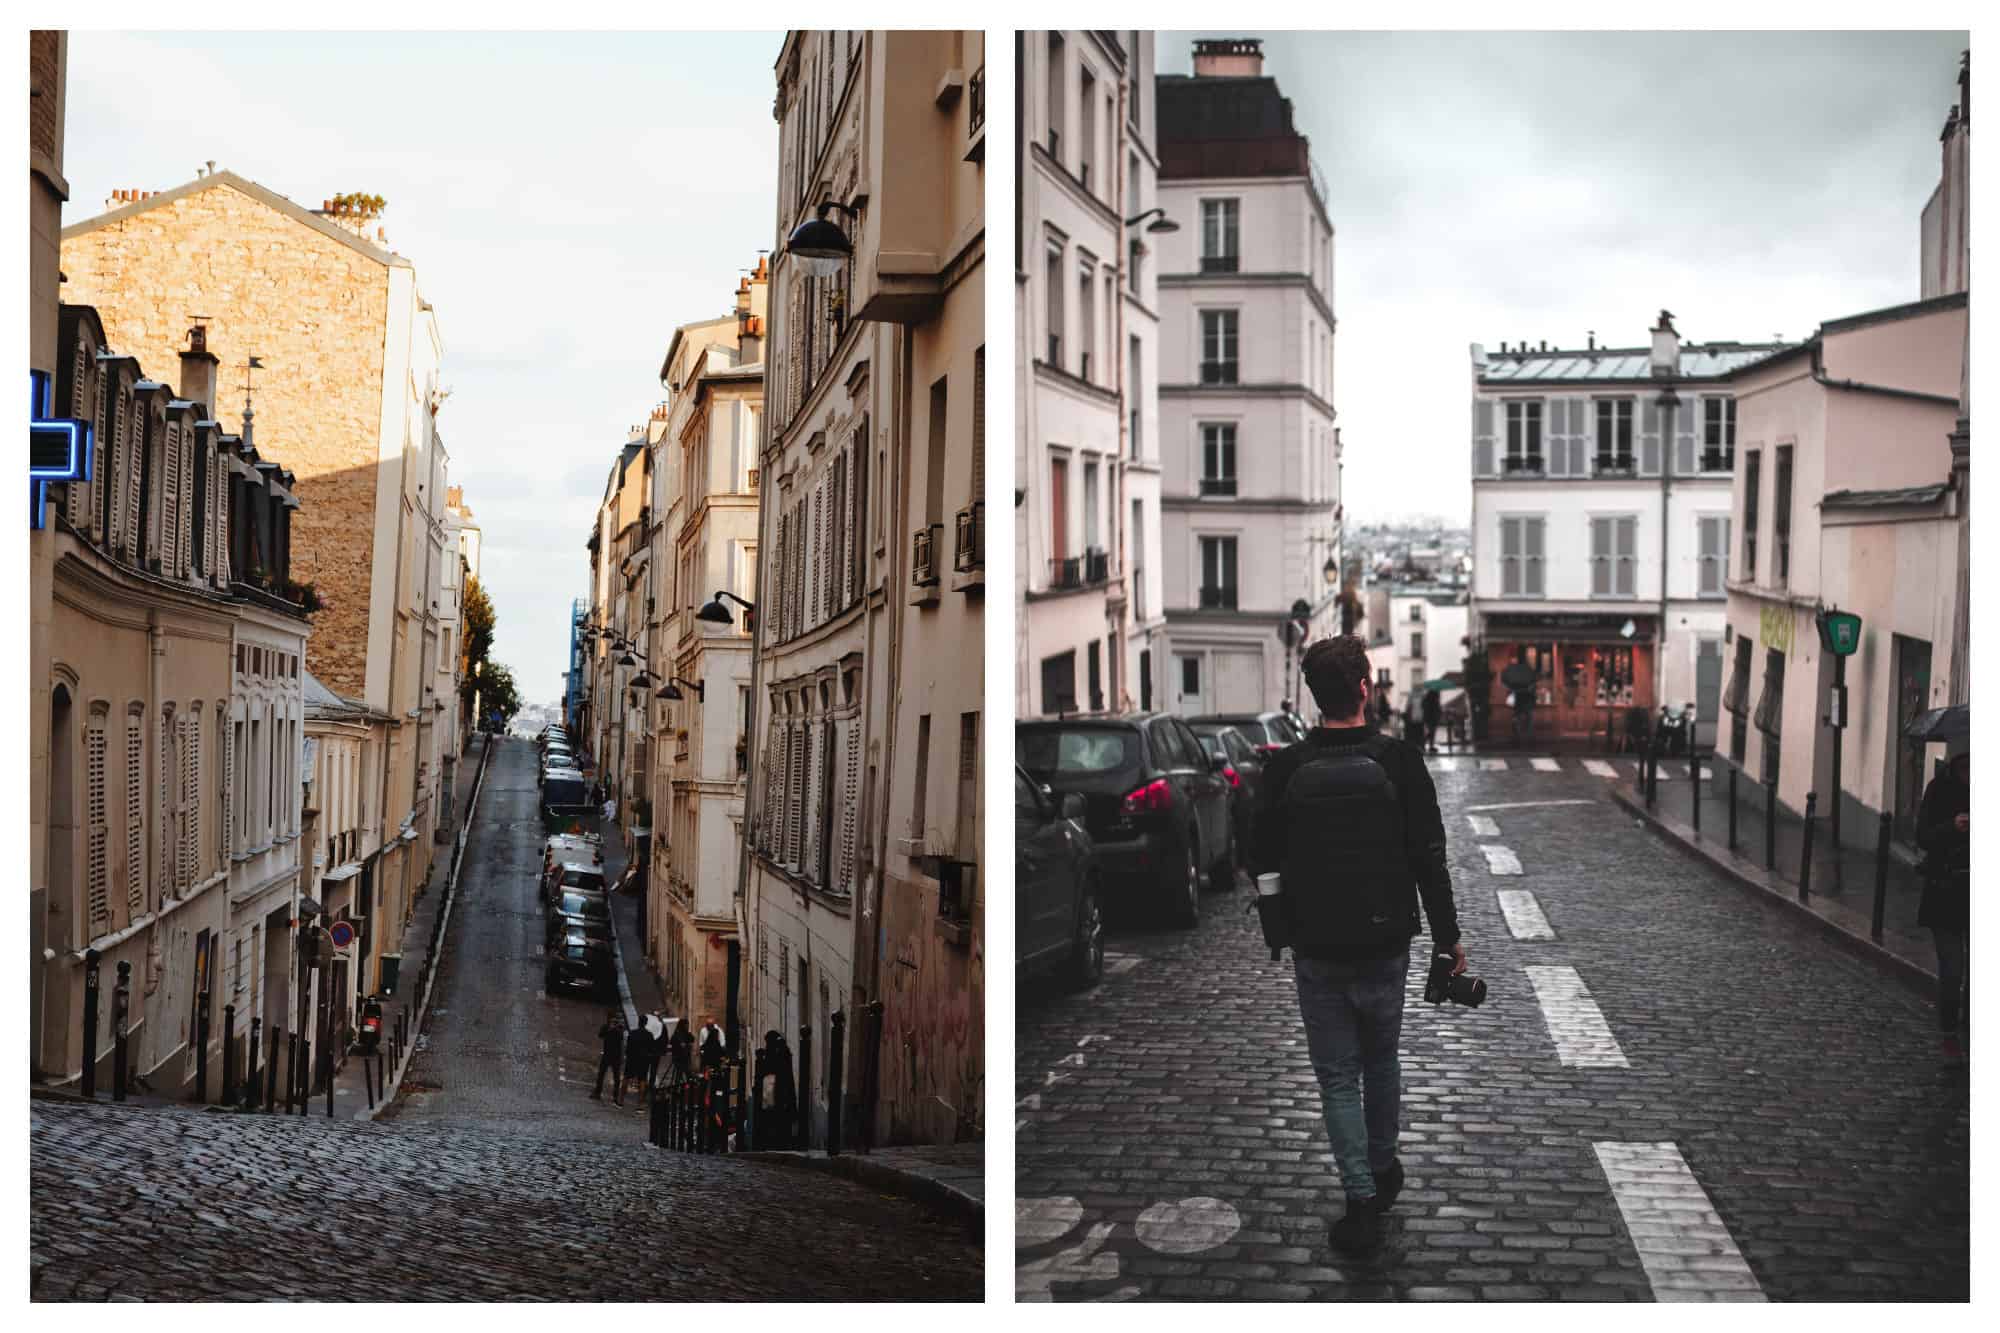 A street scene of Montmartre with a scenic curve in the road lined by crooked houses (left) and cobblestone streets of Montmartre with a man seen strolling from the back (right).